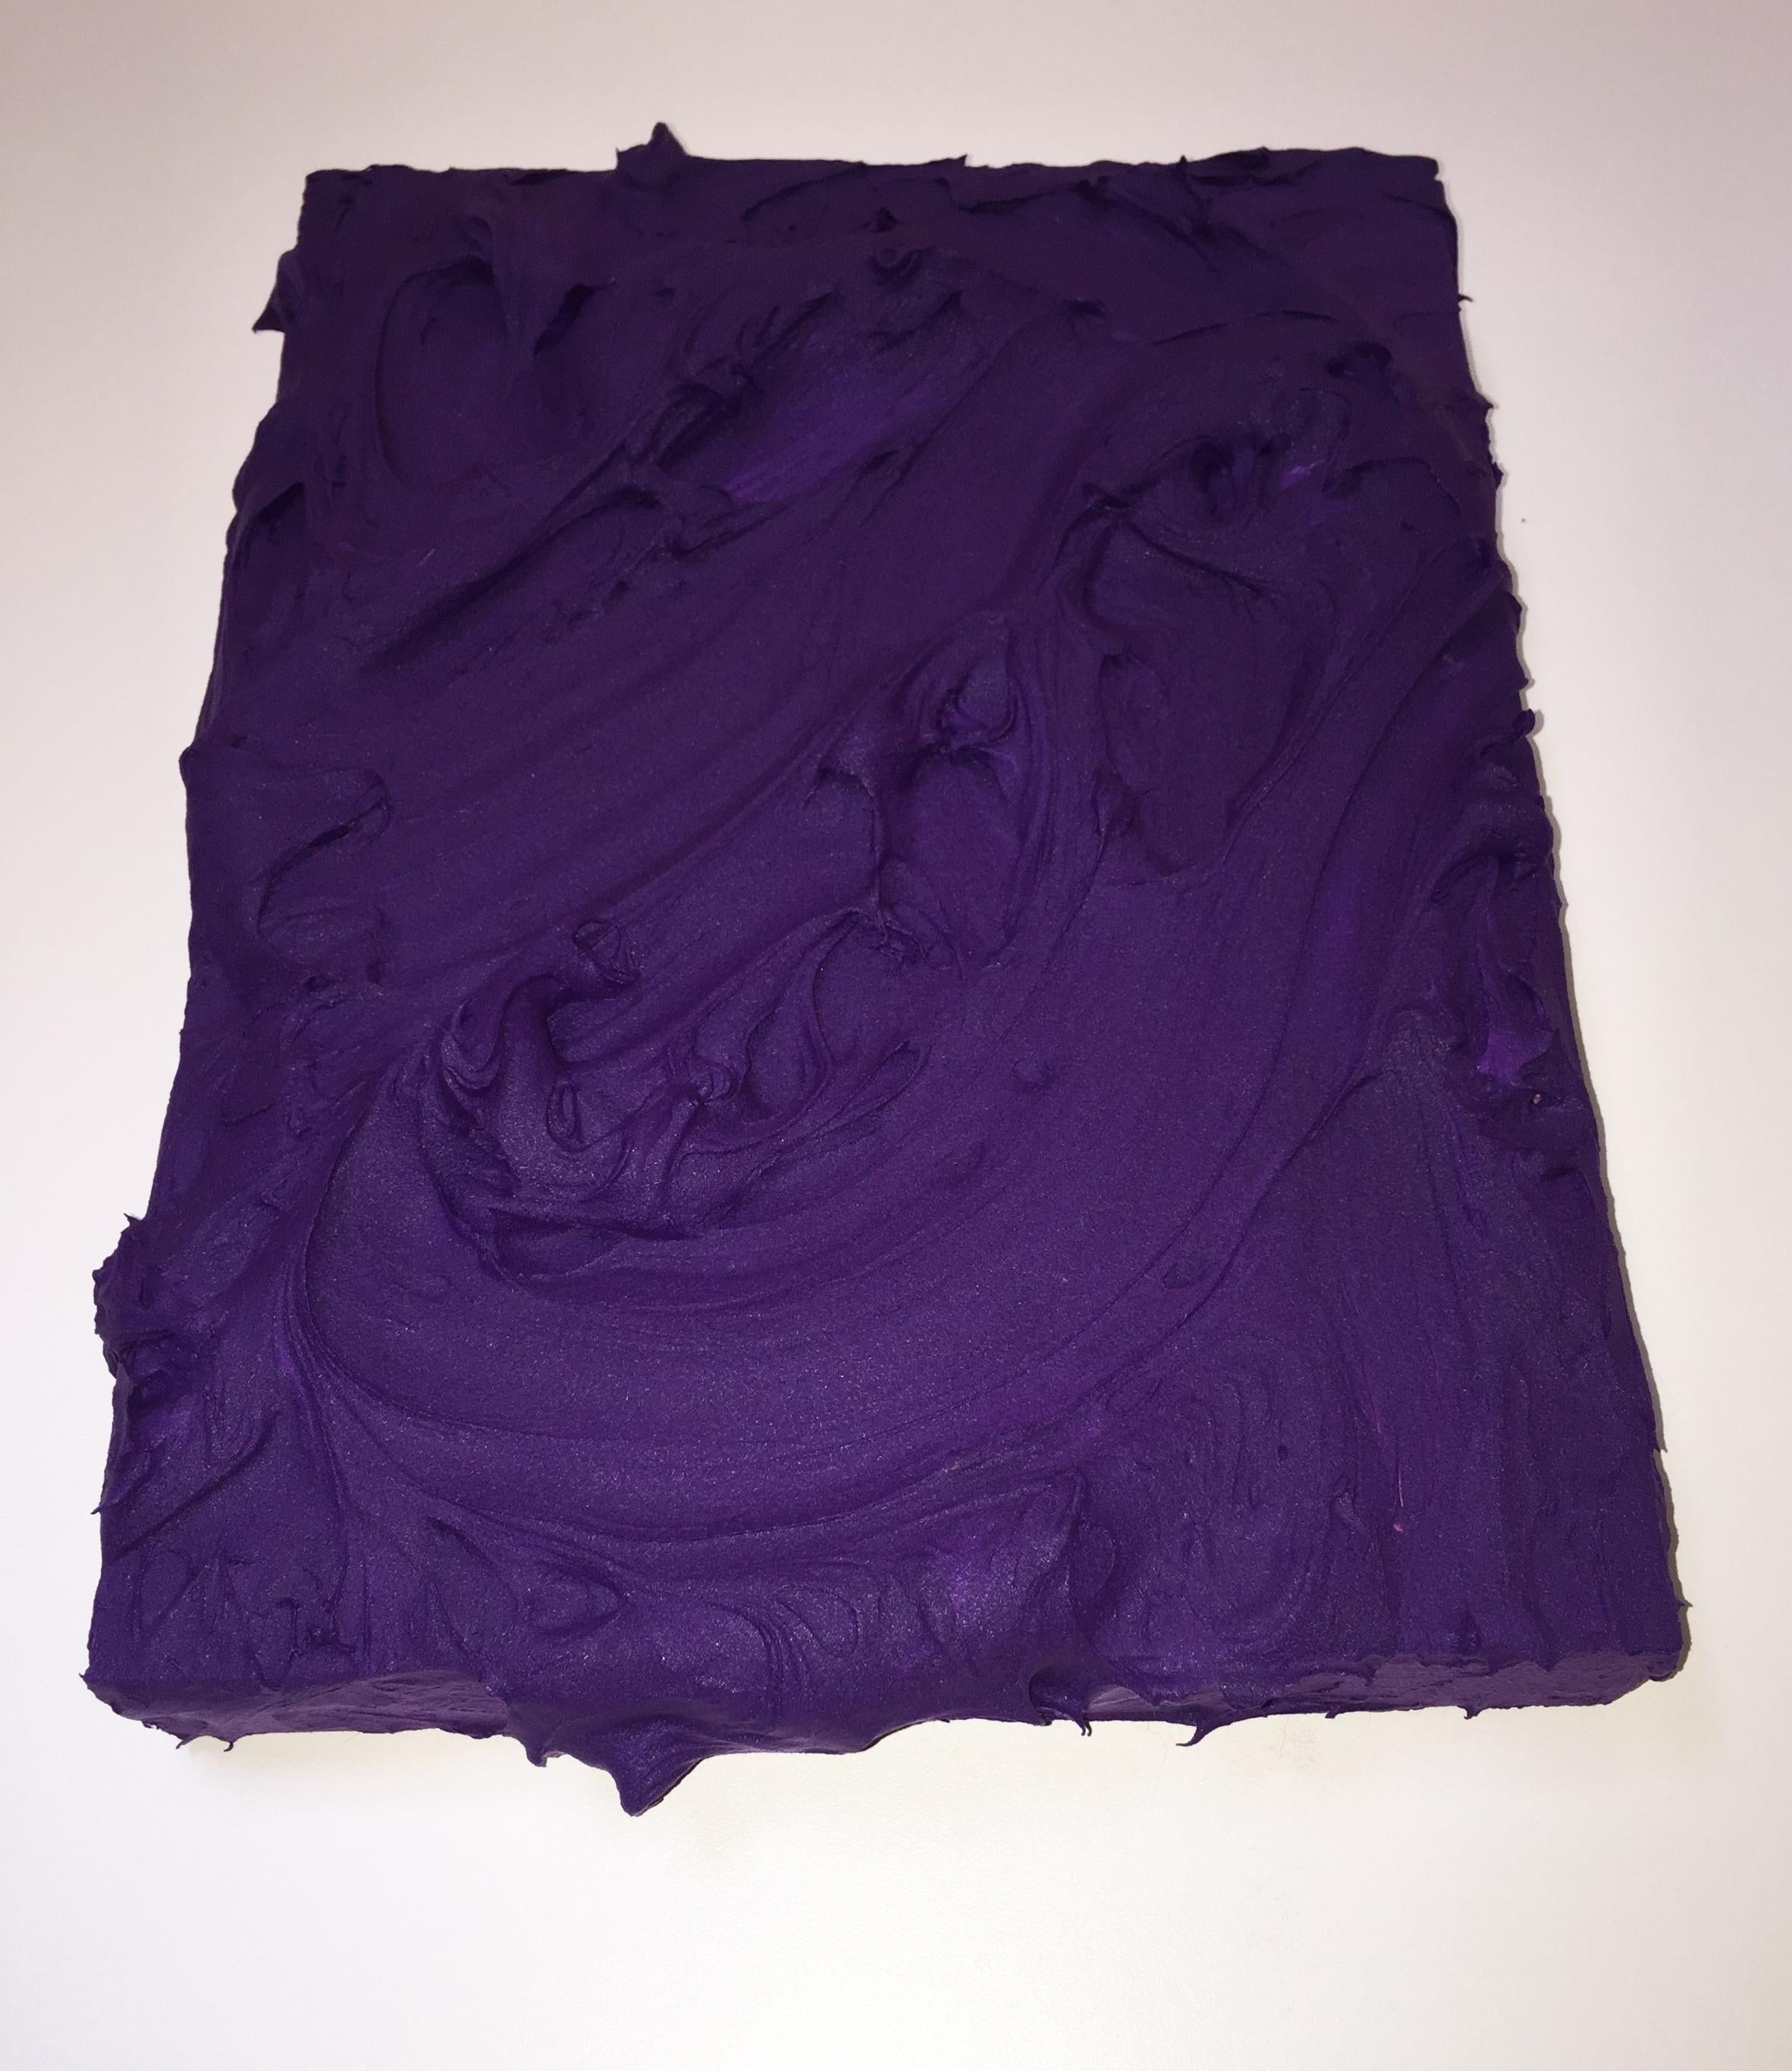 Grape Excess (violet impasto thick painting dark contemporary design vivid)  - Brown Abstract Painting by Chloe Hedden